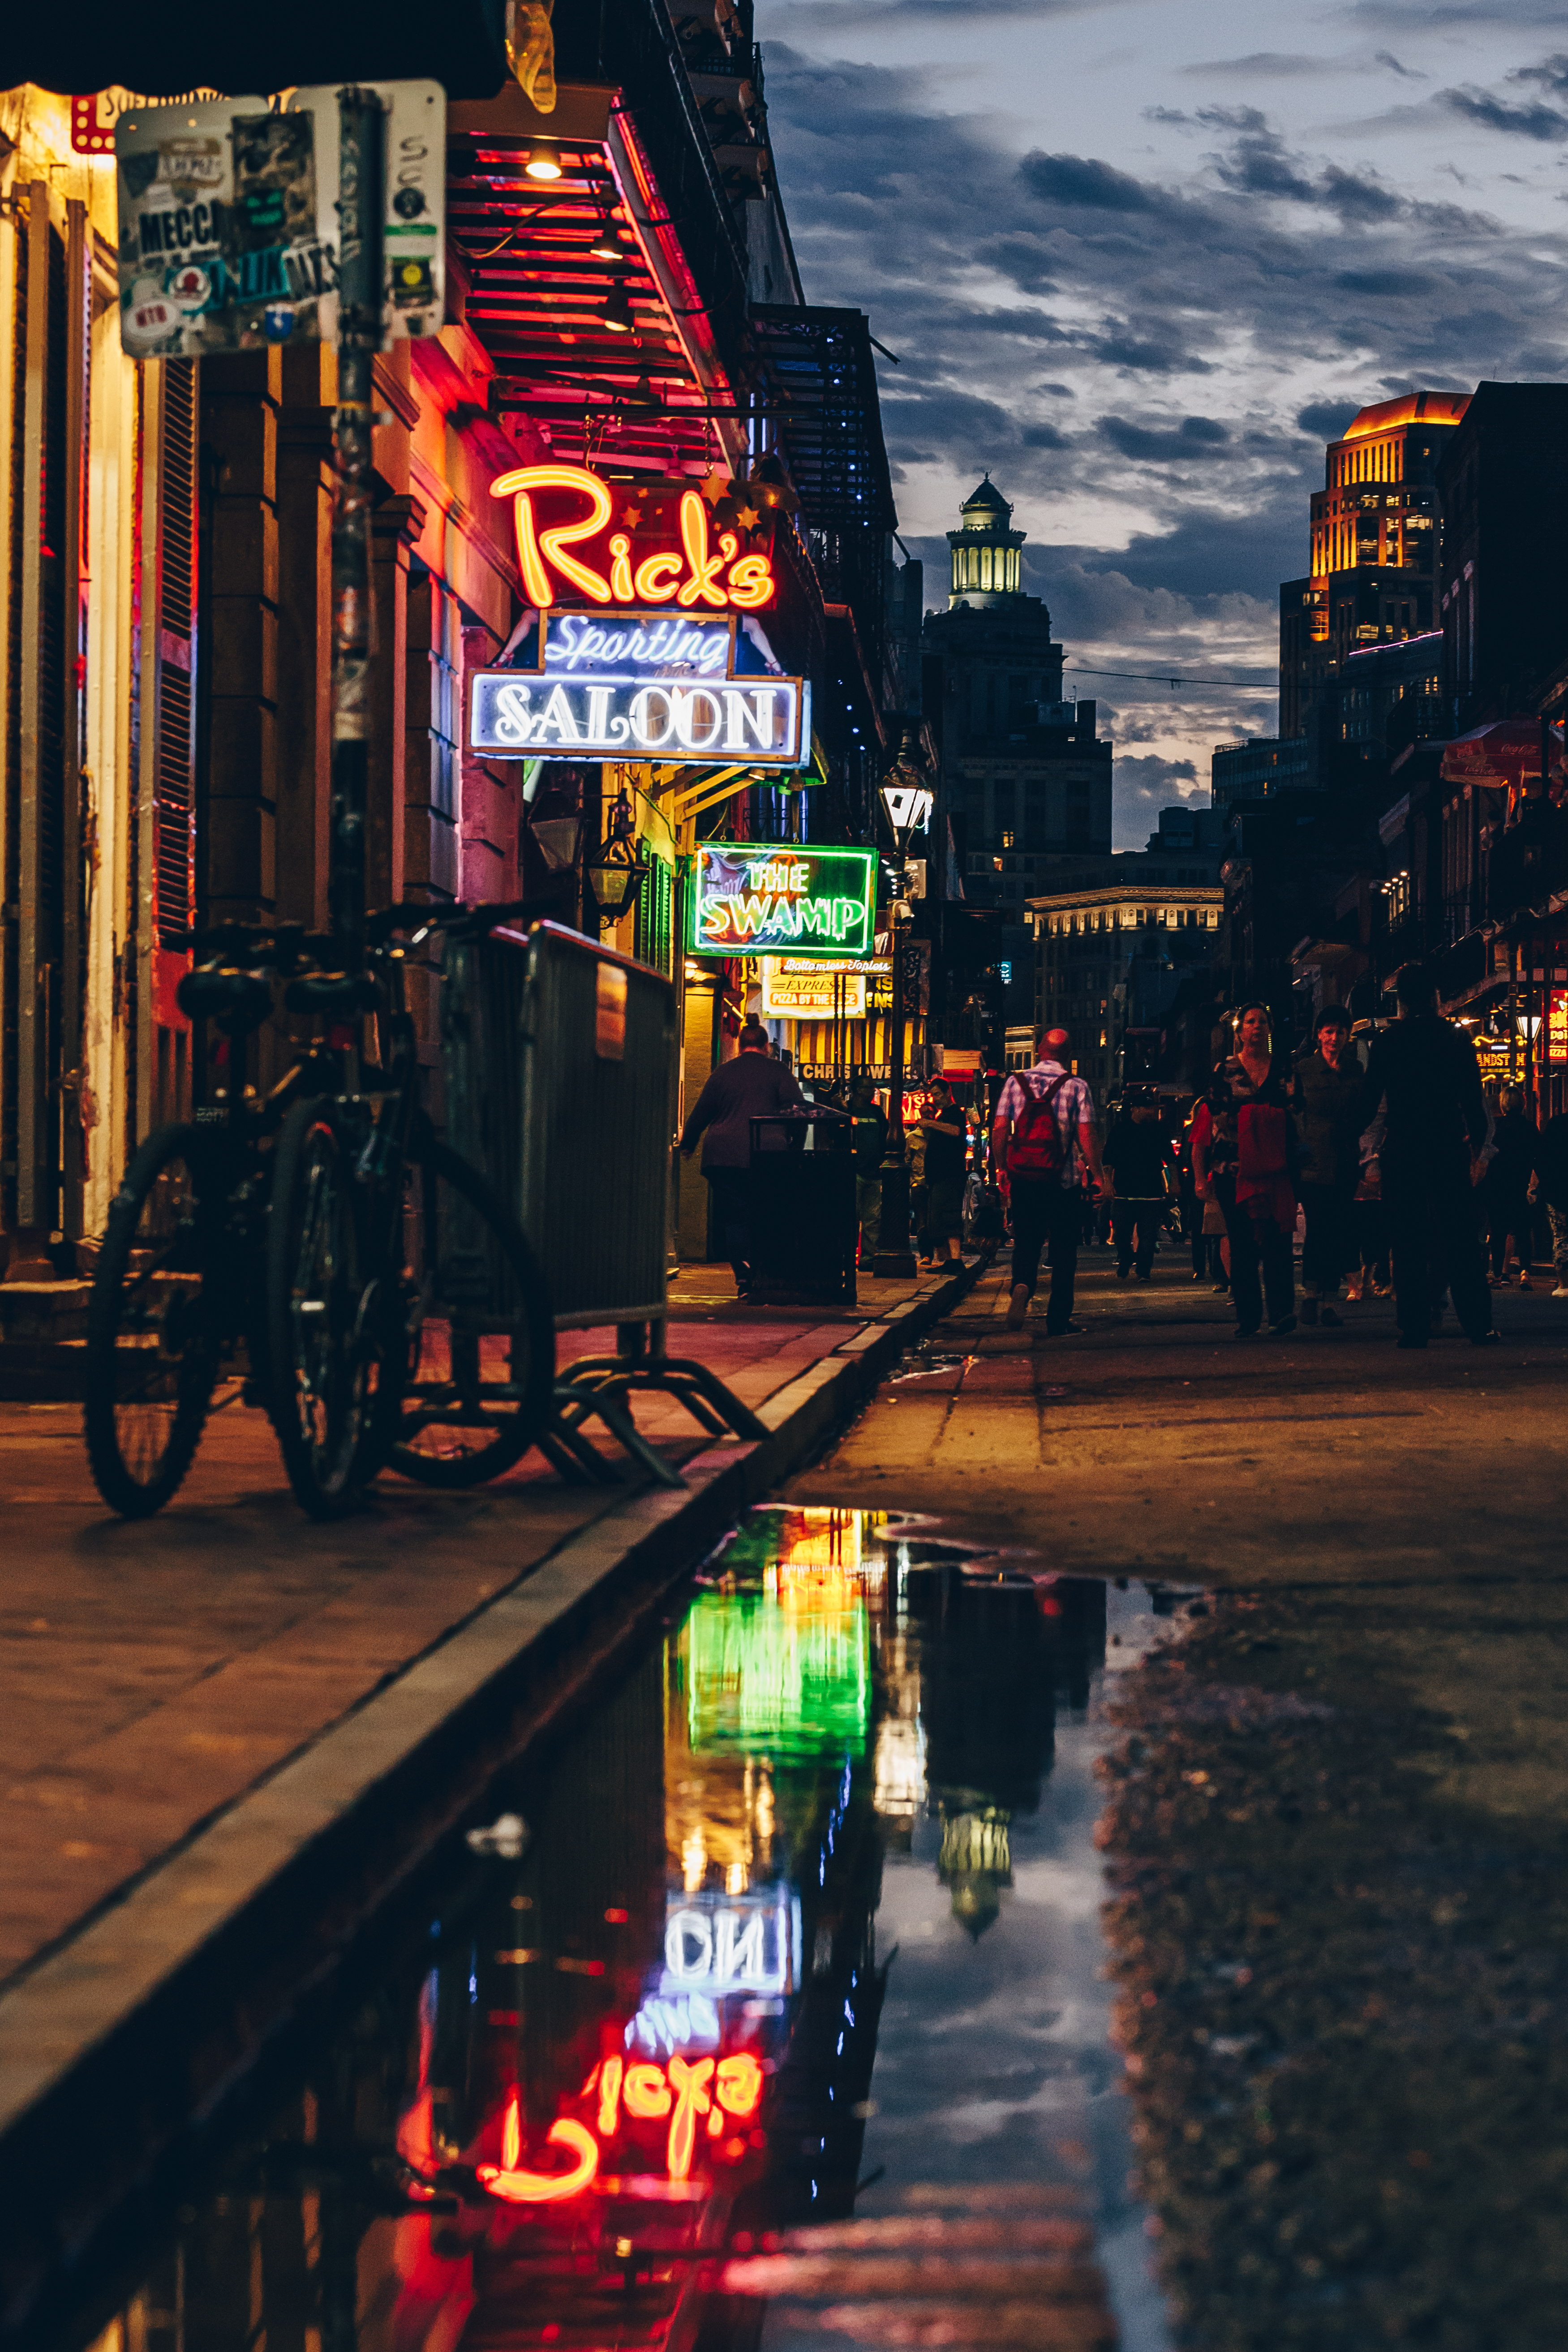 Wing_Hei_Emily_Cheng_Assignment_3_Travel_Photography_New_Orleans_Neon_Lights-3